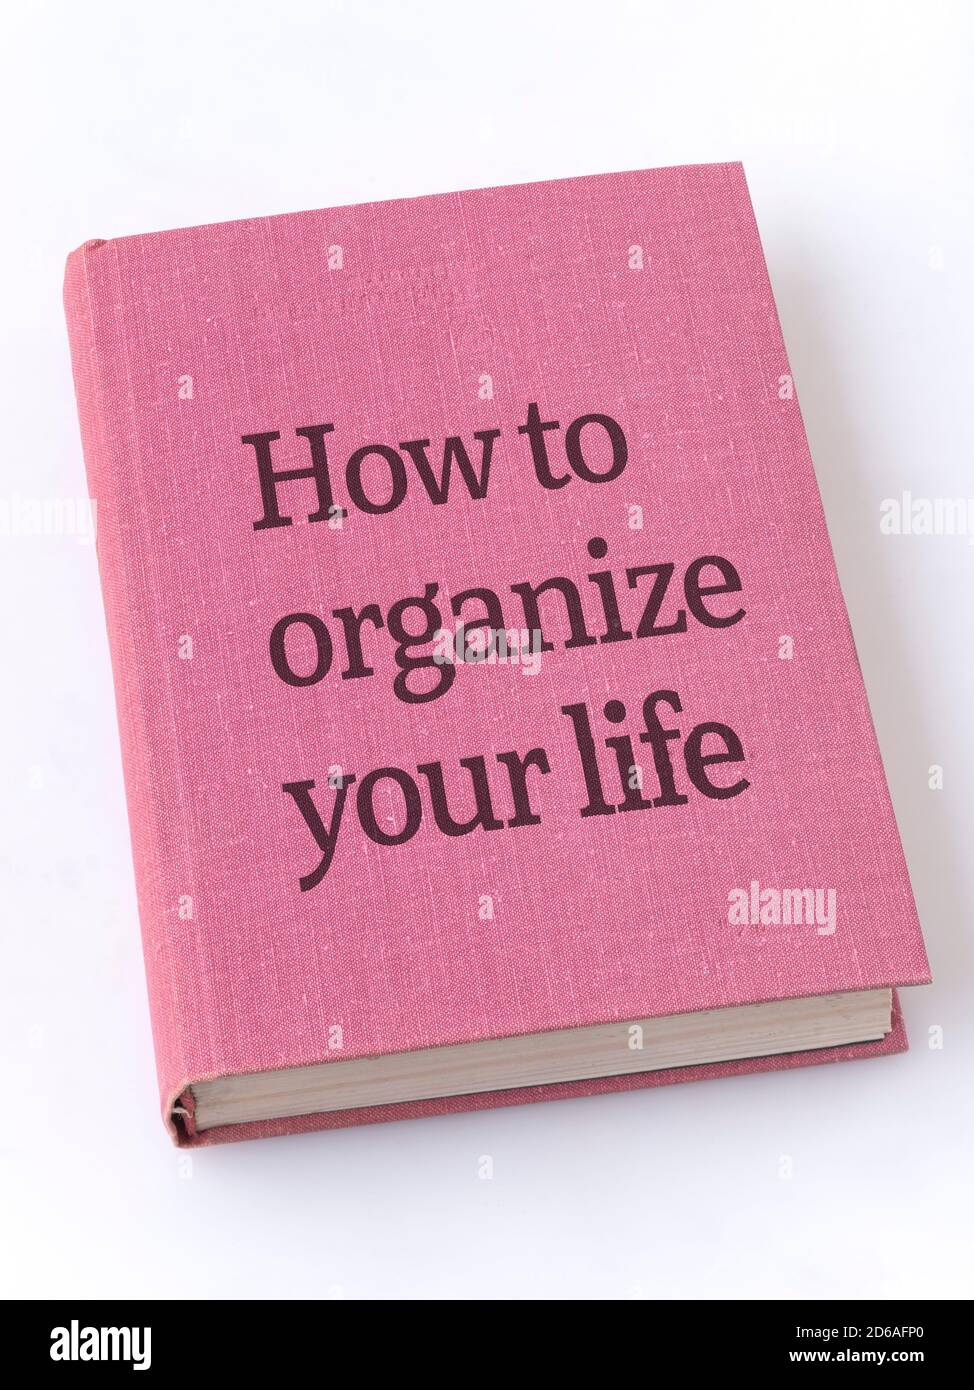 how to organize life phrase printed on textile book cover Stock Photo